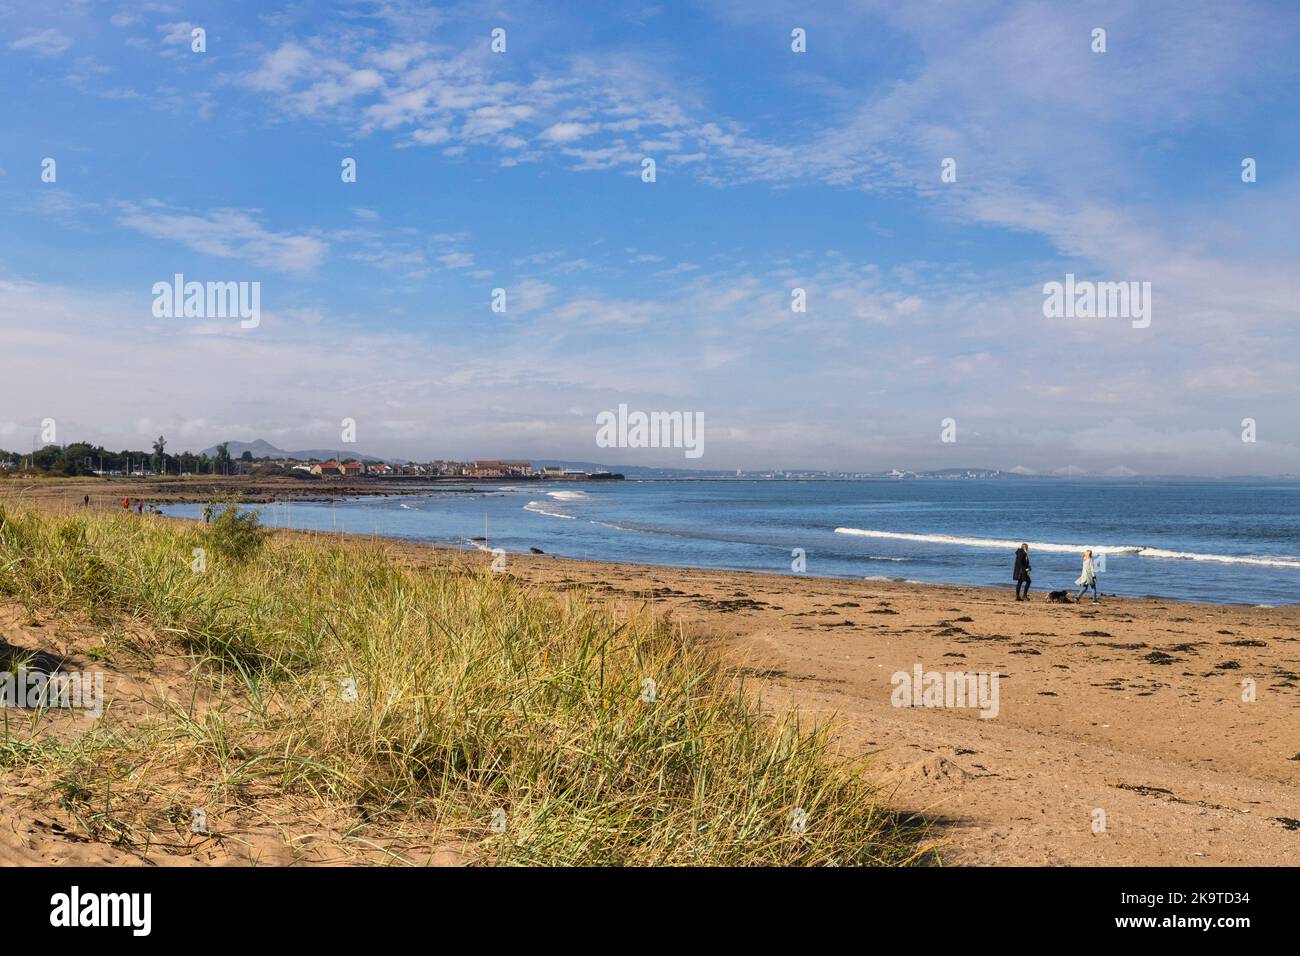 19 September 2022: Longniddry, Lothian, Scotland - A blustery, sunny day at Longniddry Bents, a shallow bay popular for watersports. Forth bridges can Stock Photo